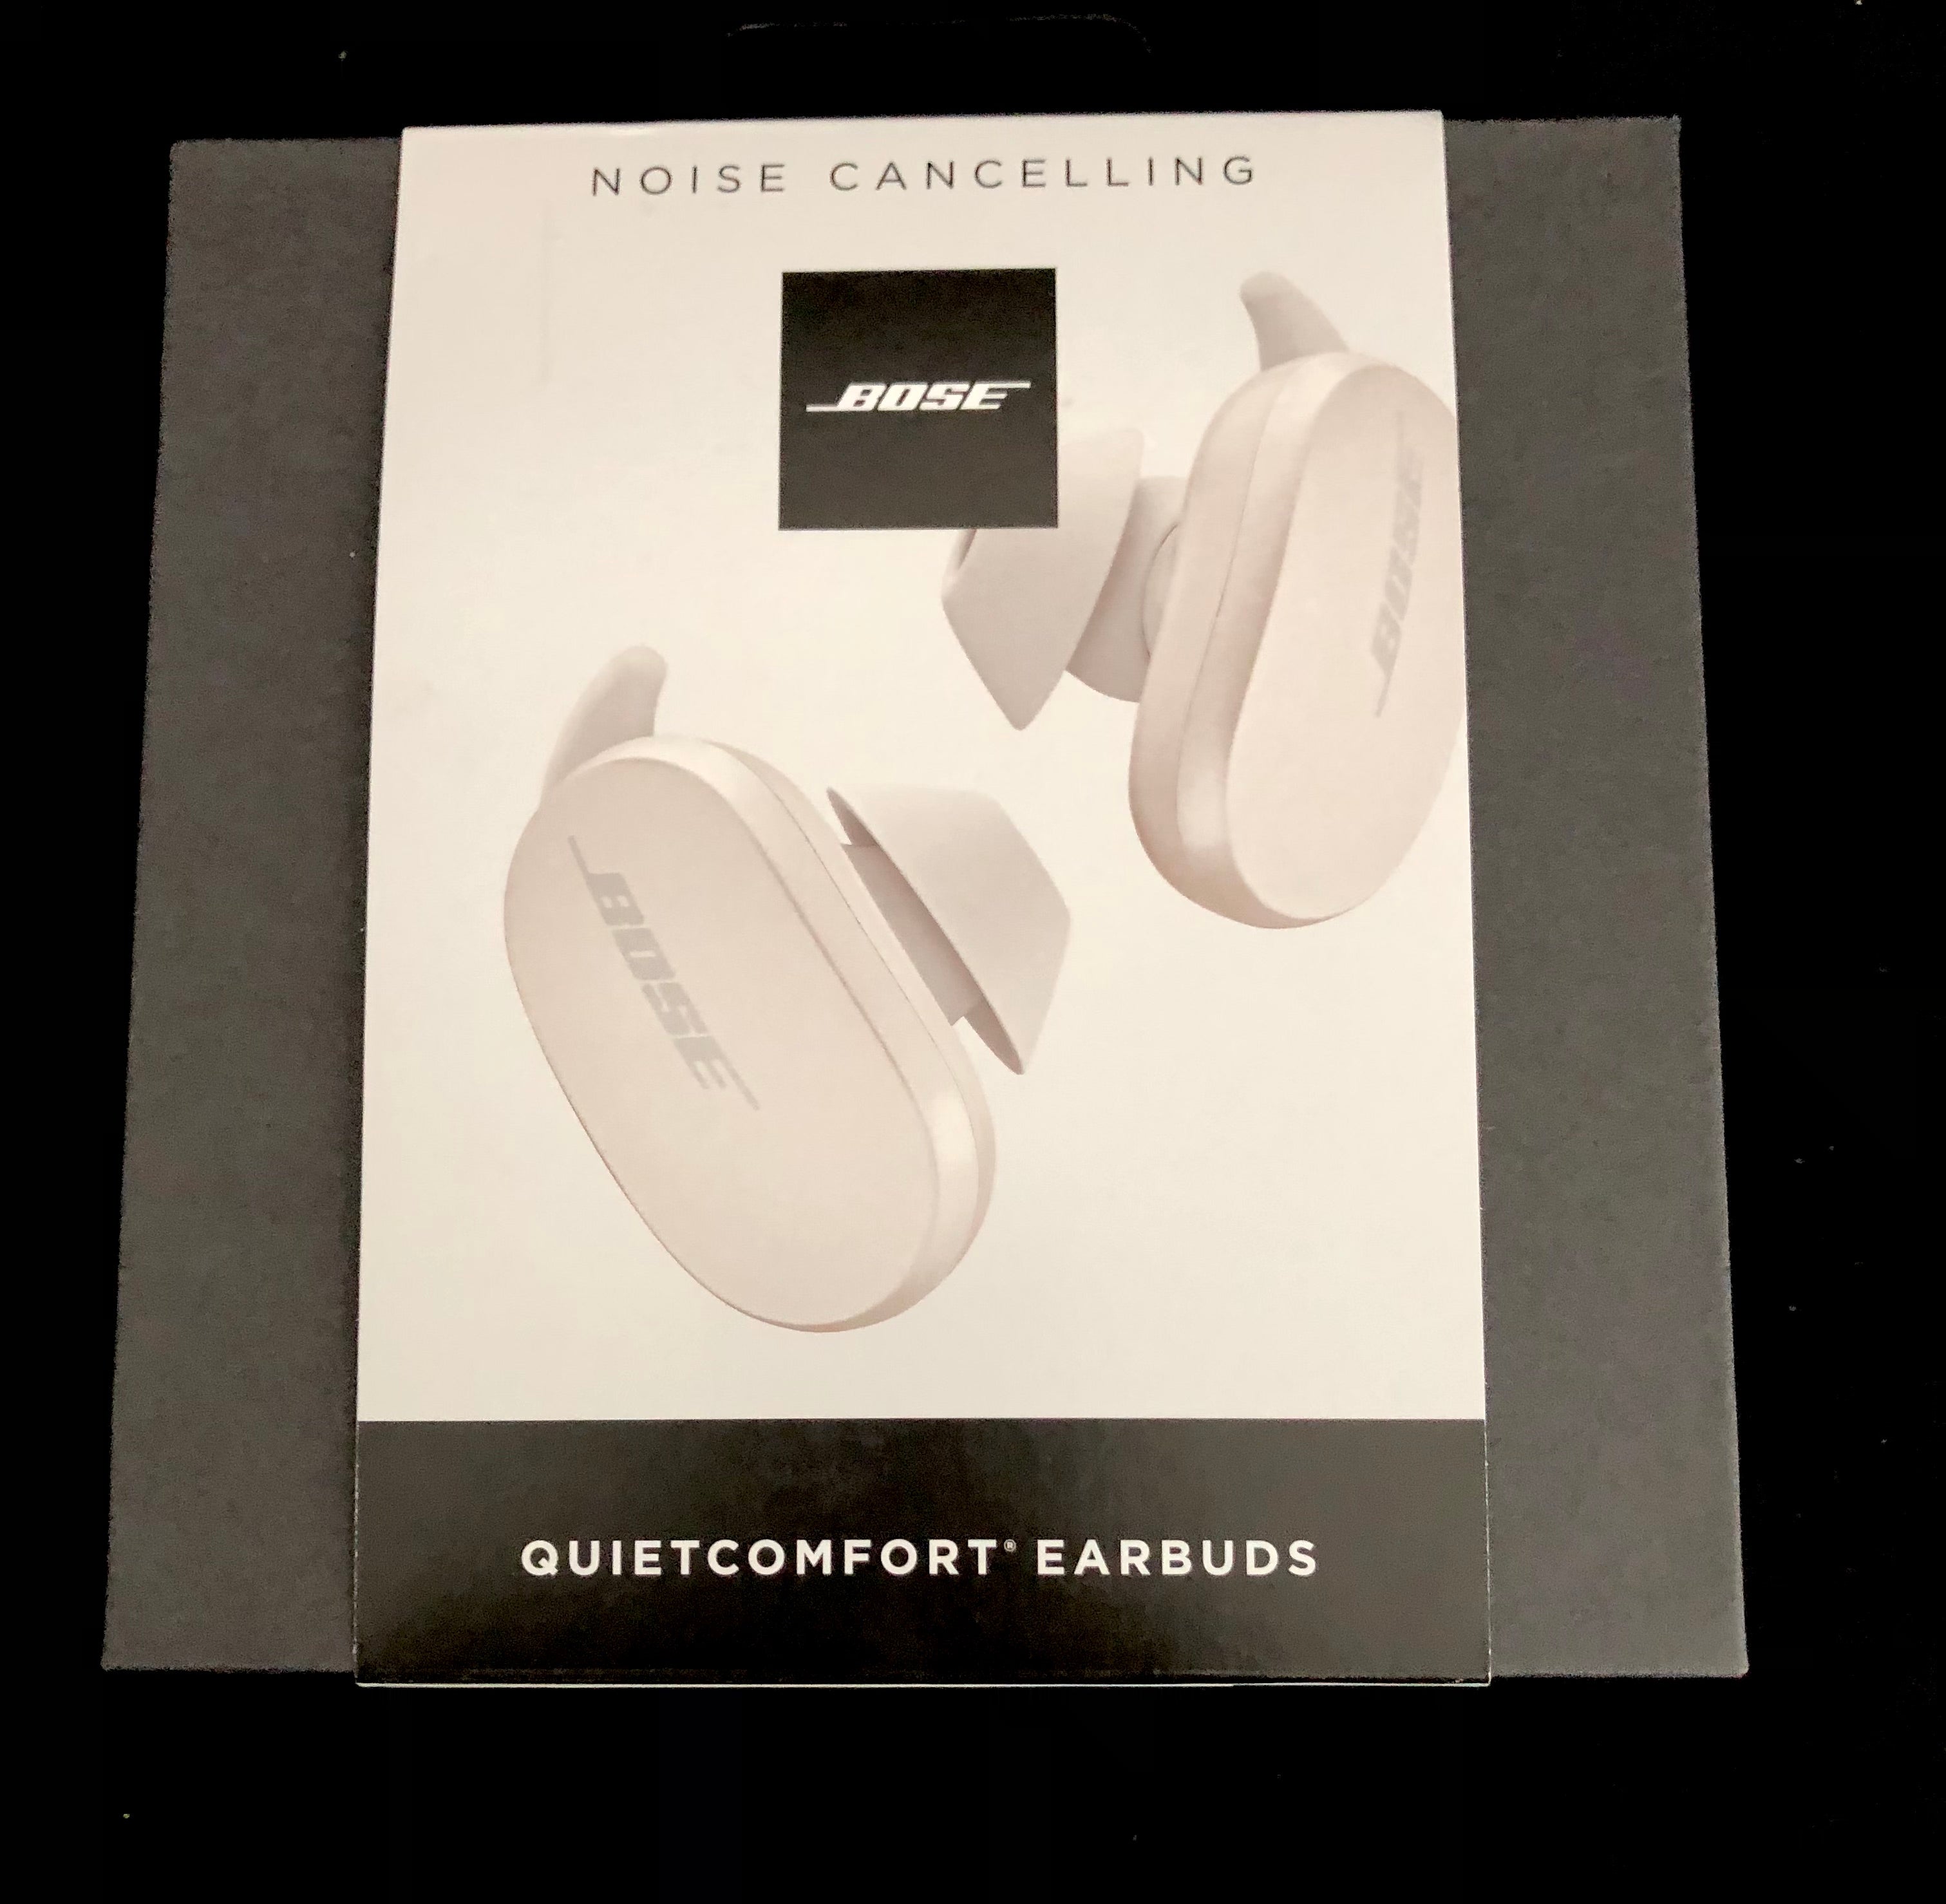 Bose QuietComfort Noise Cancelling Earbuds - white